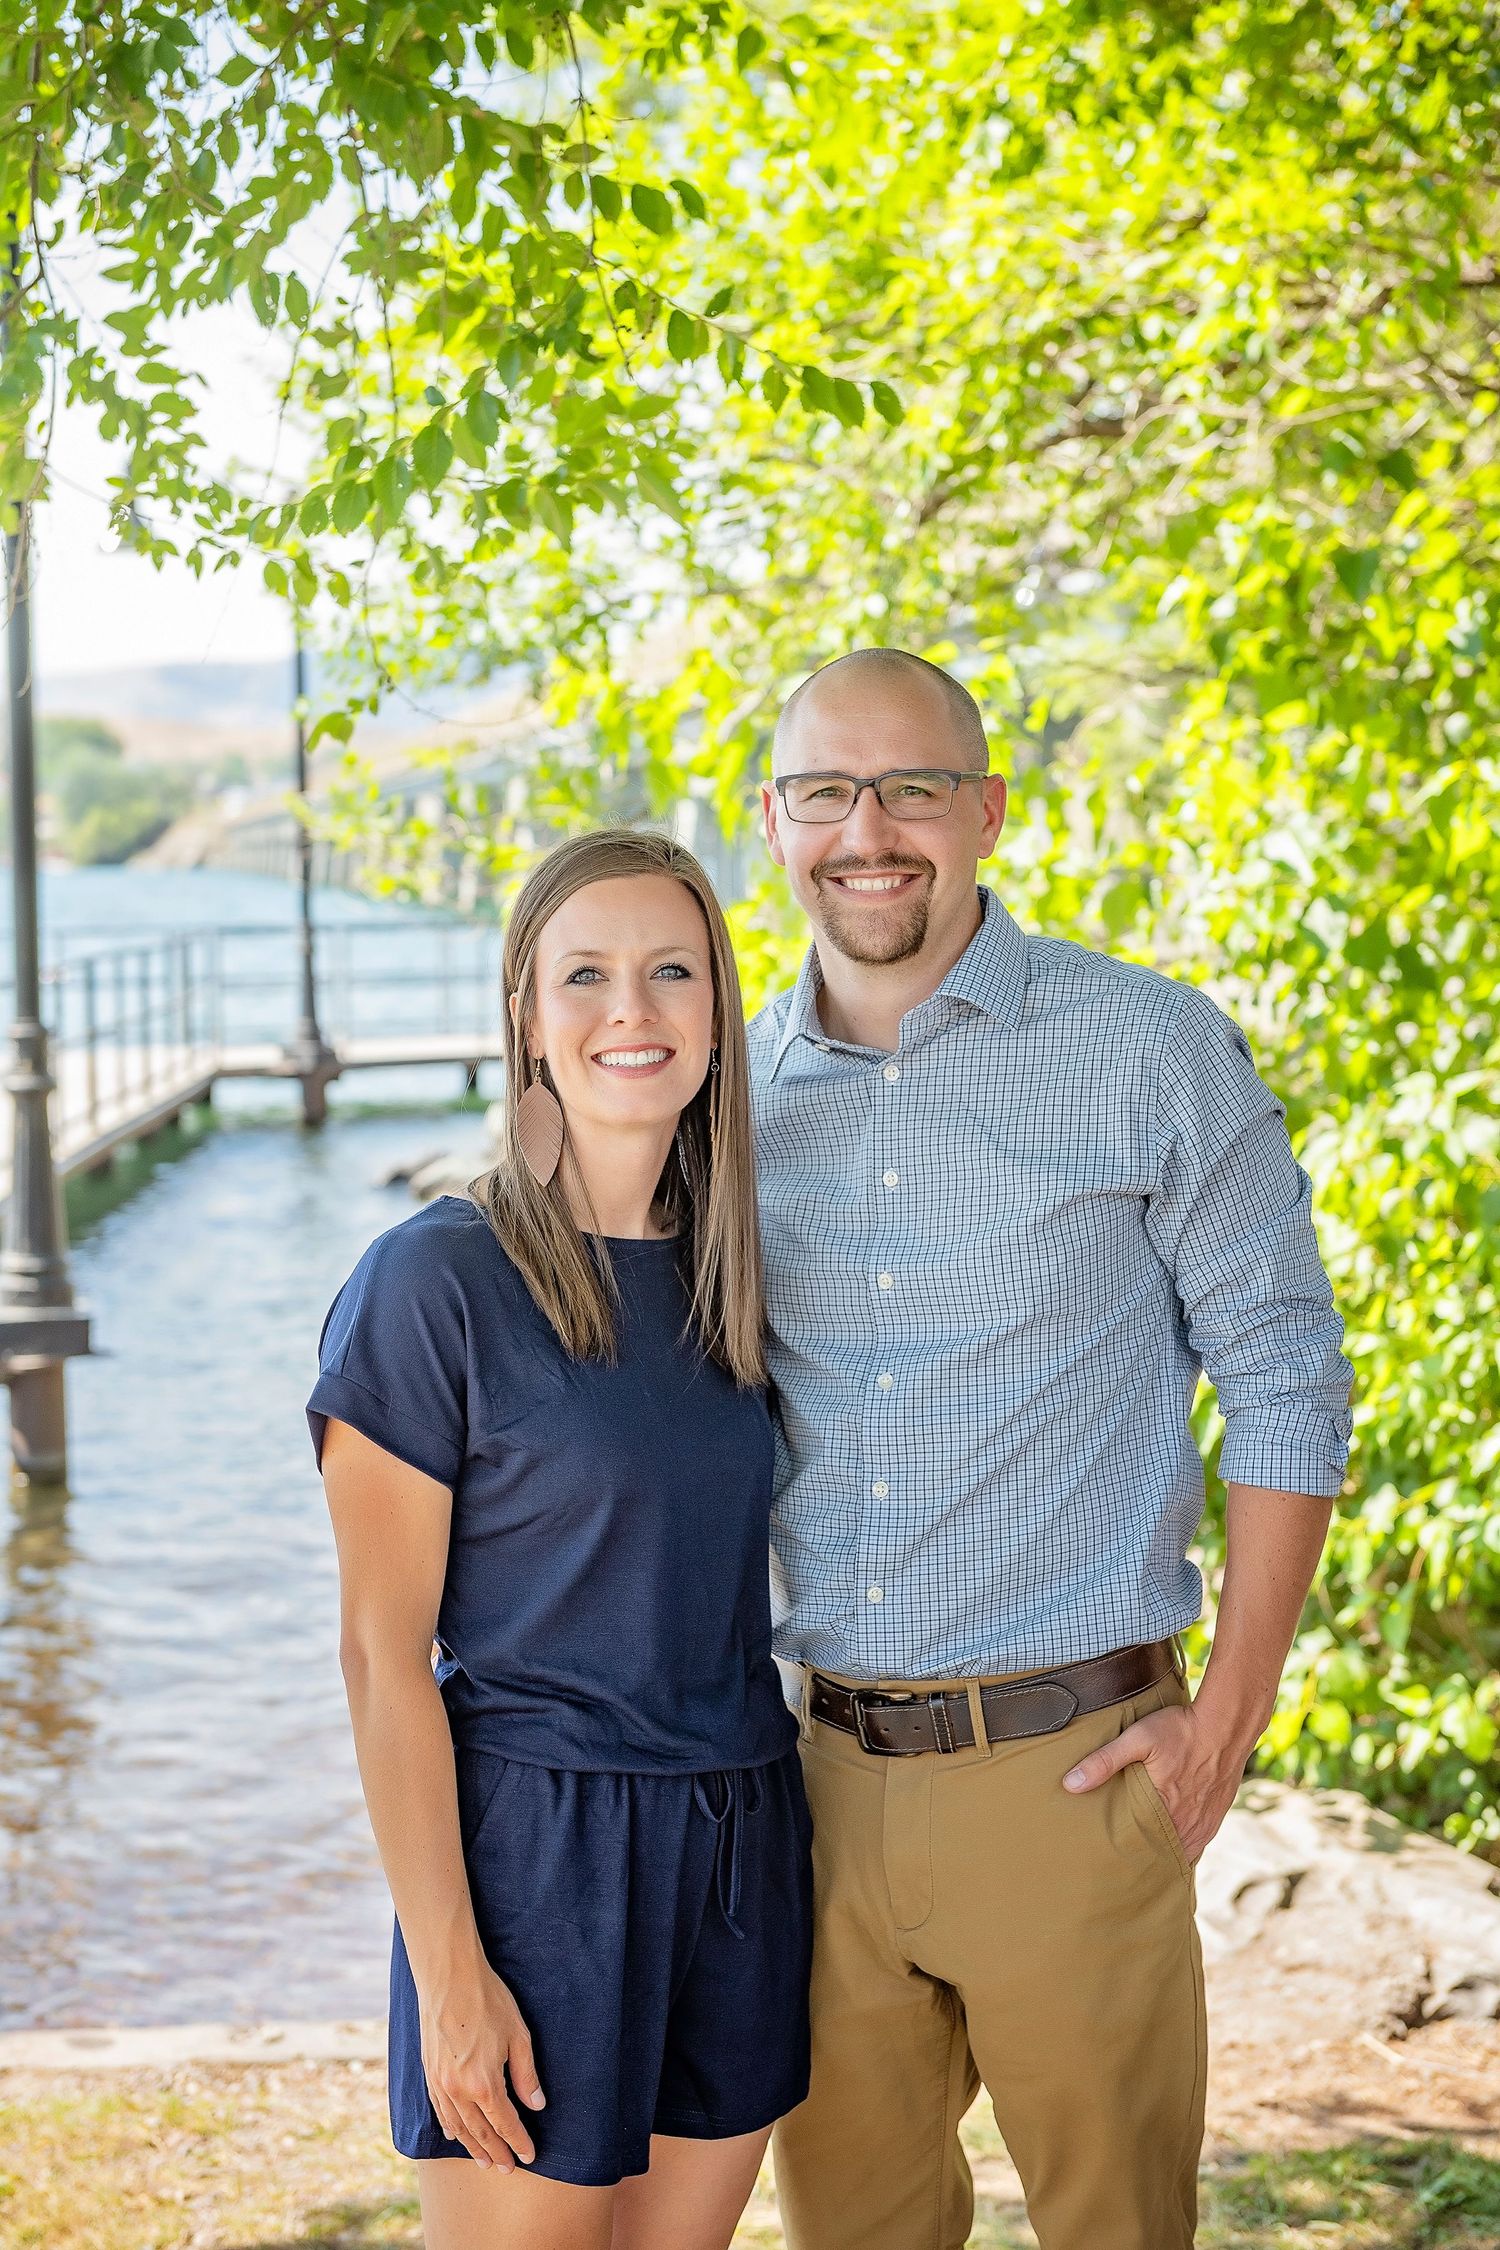 Gallery Photo of My husband and I are both Counselors in Idaho and Montana